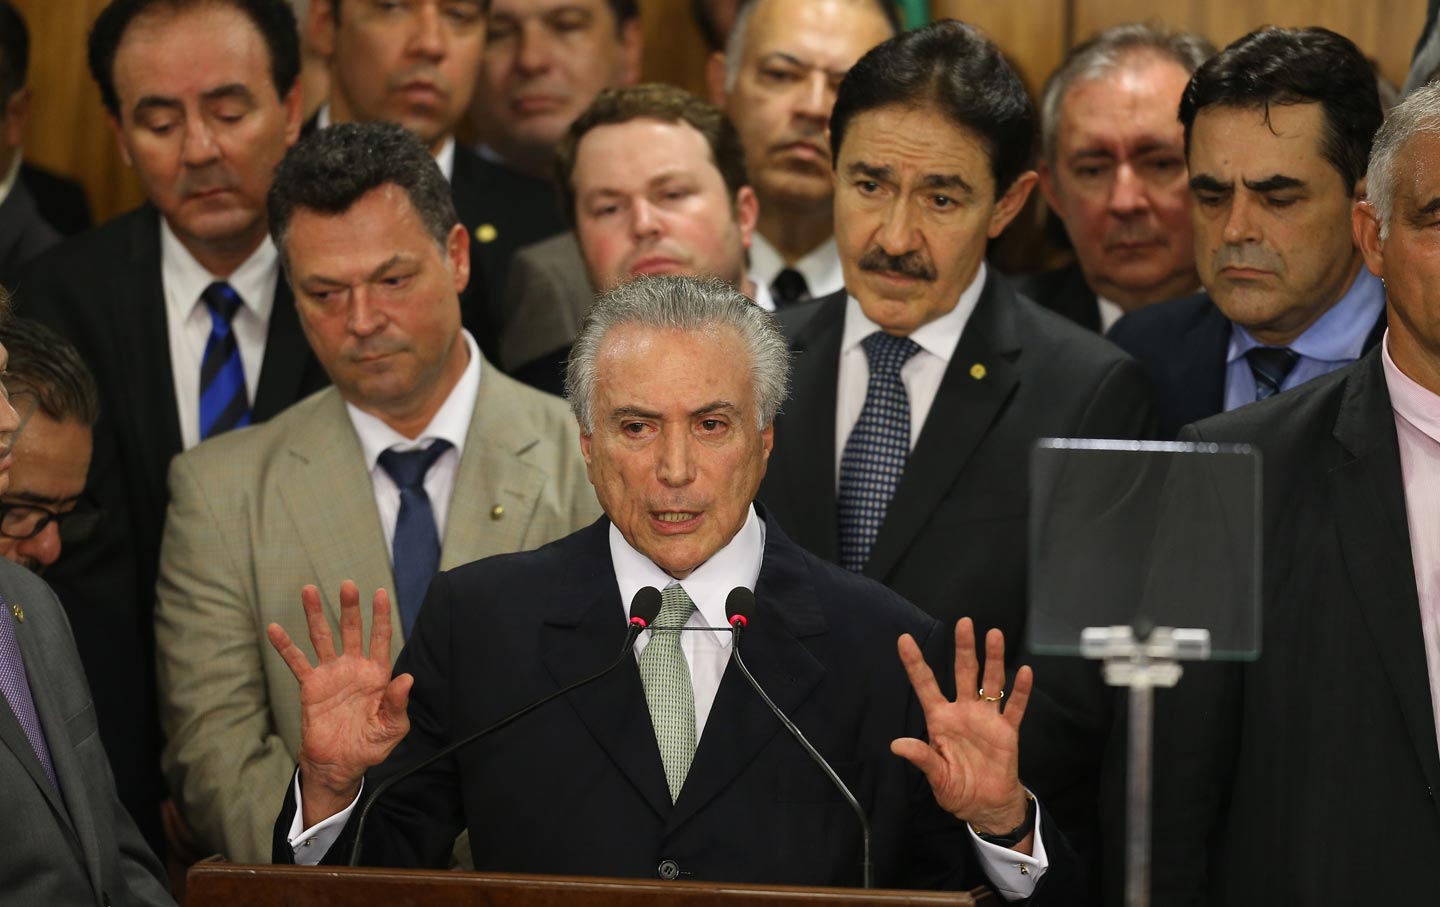 Michel Temer and his cabinet